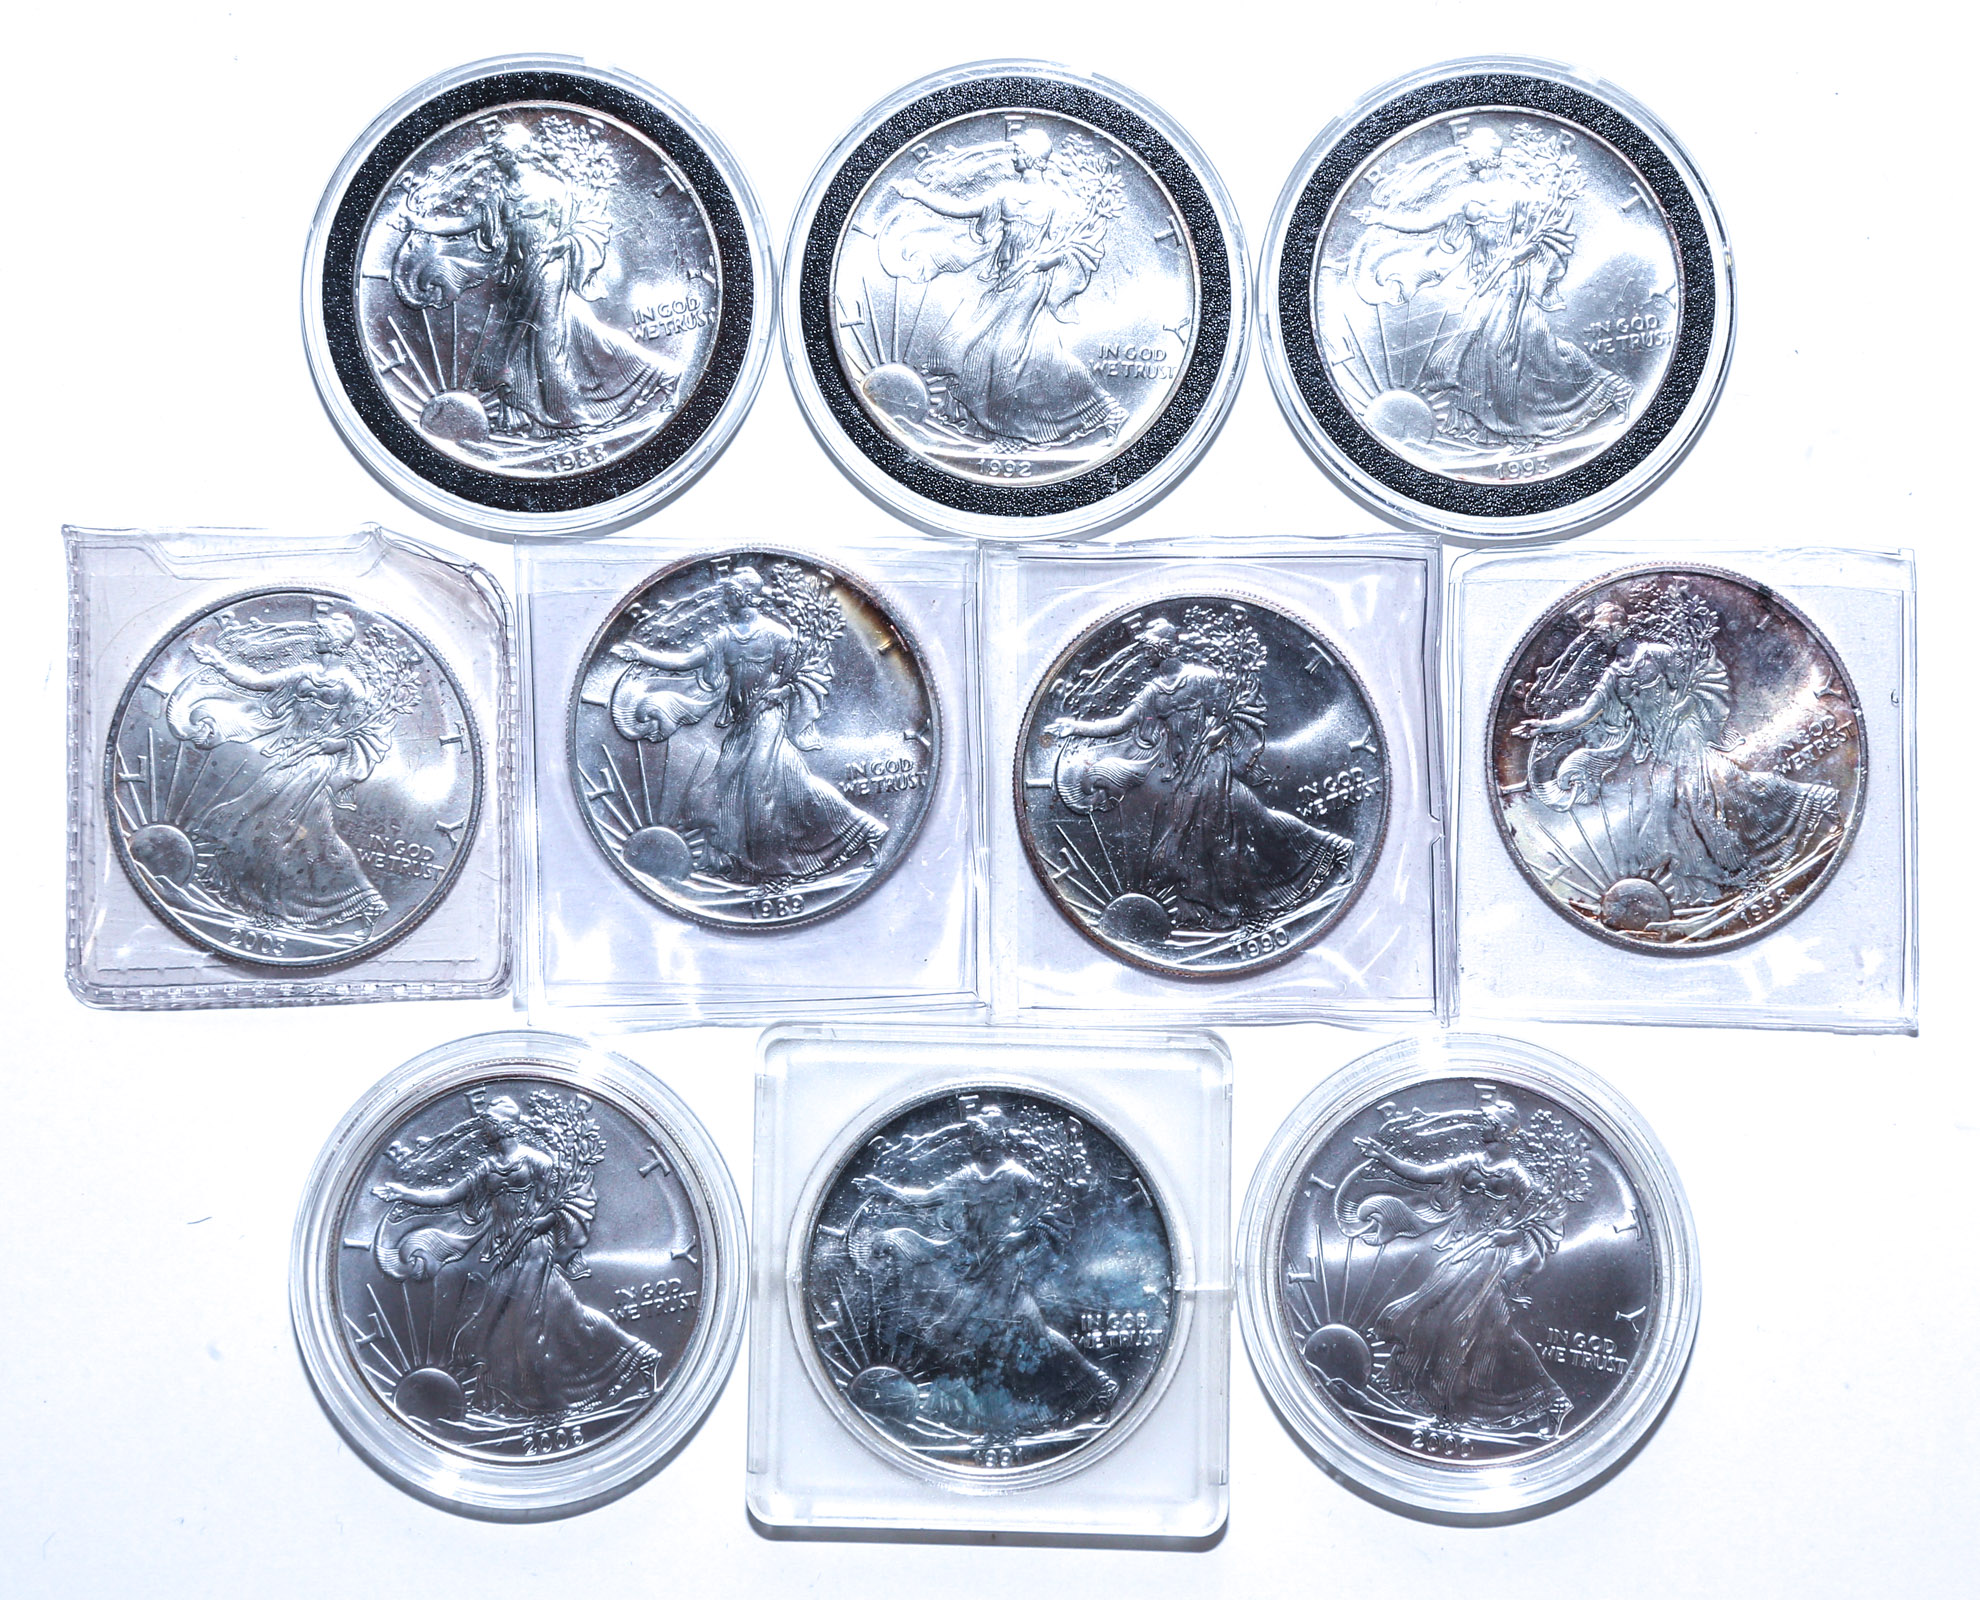 10 DIFFERENT SILVER EAGLES 1988-2006